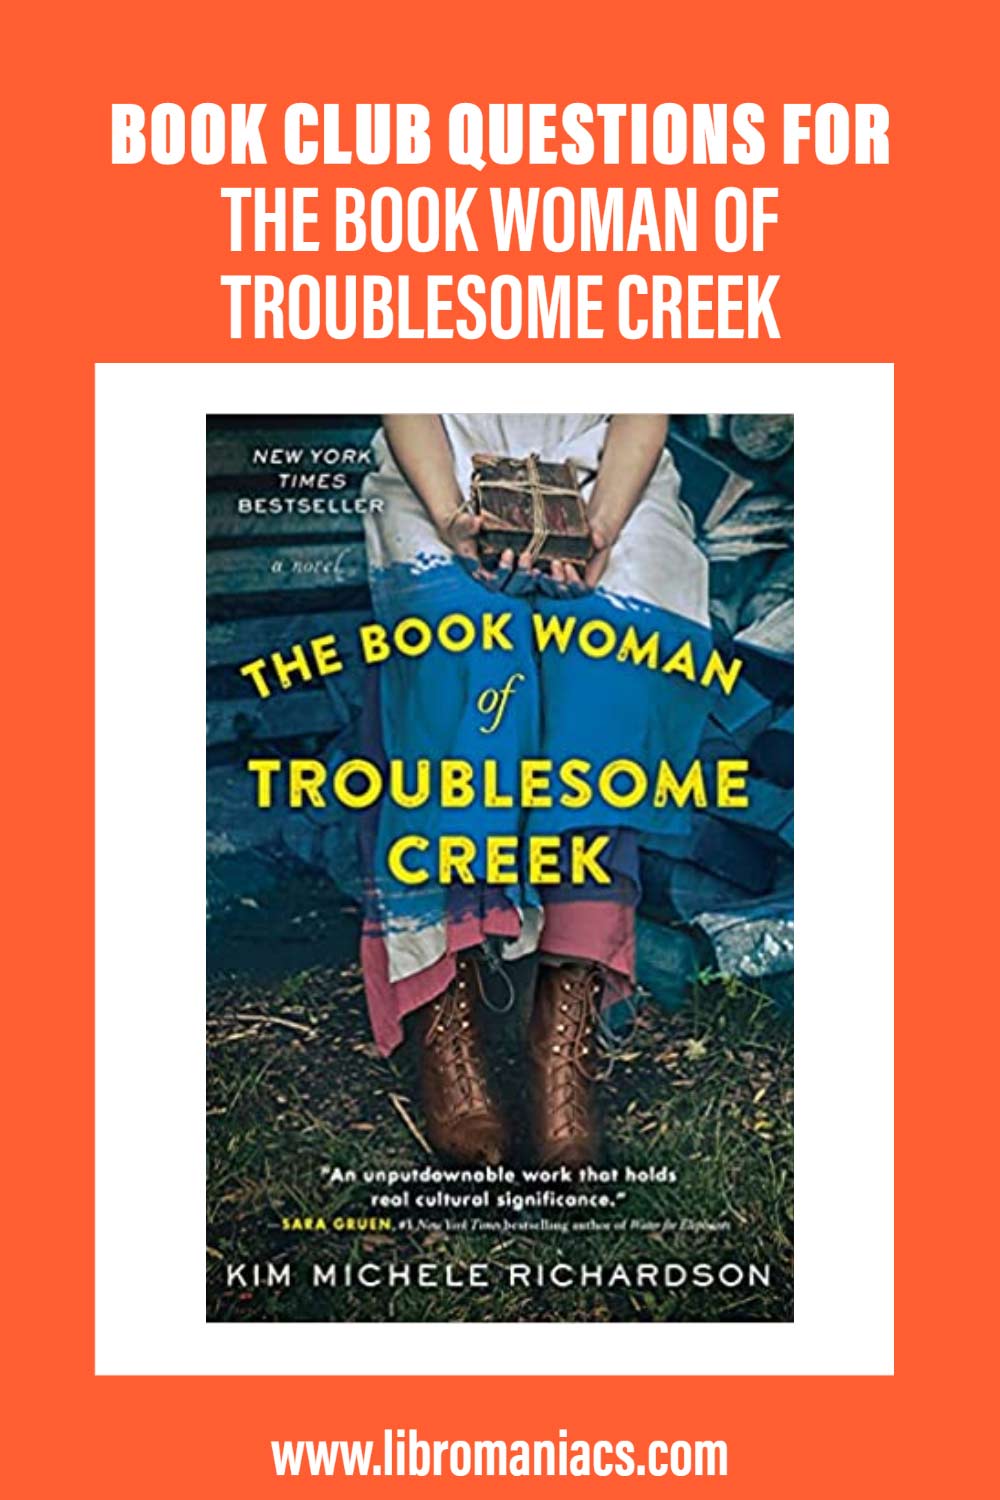 Book club questions for Book Woman of Troublesome Creek